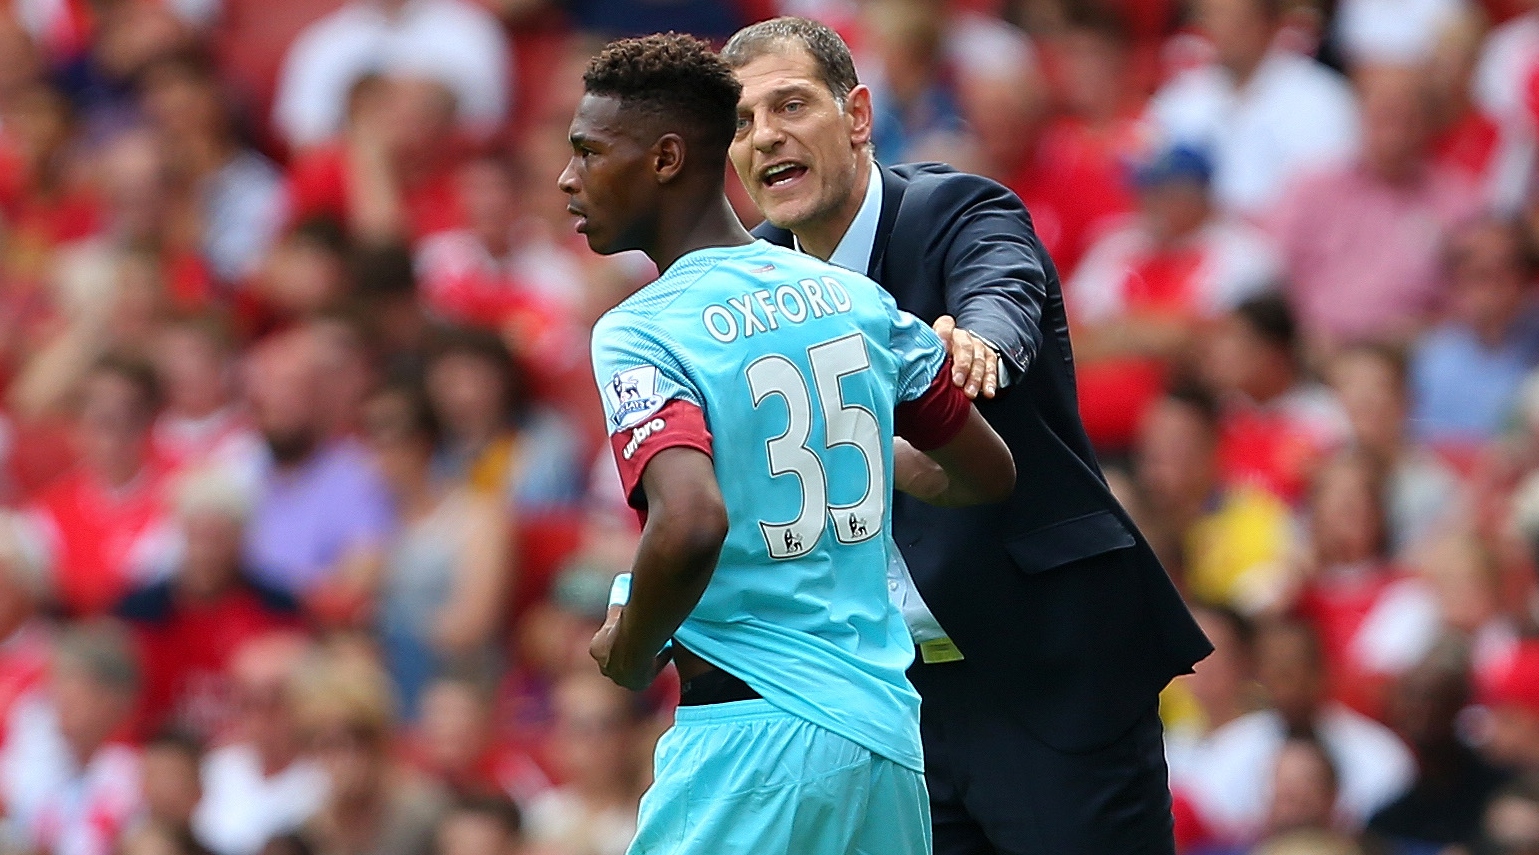 West Ham United manager Slaven Bilic talks to Reece Oxford of West Ham United during the Premier League match between Arsenal and West Ham United at Emirates Stadium on August 9, 2015 in London, England.